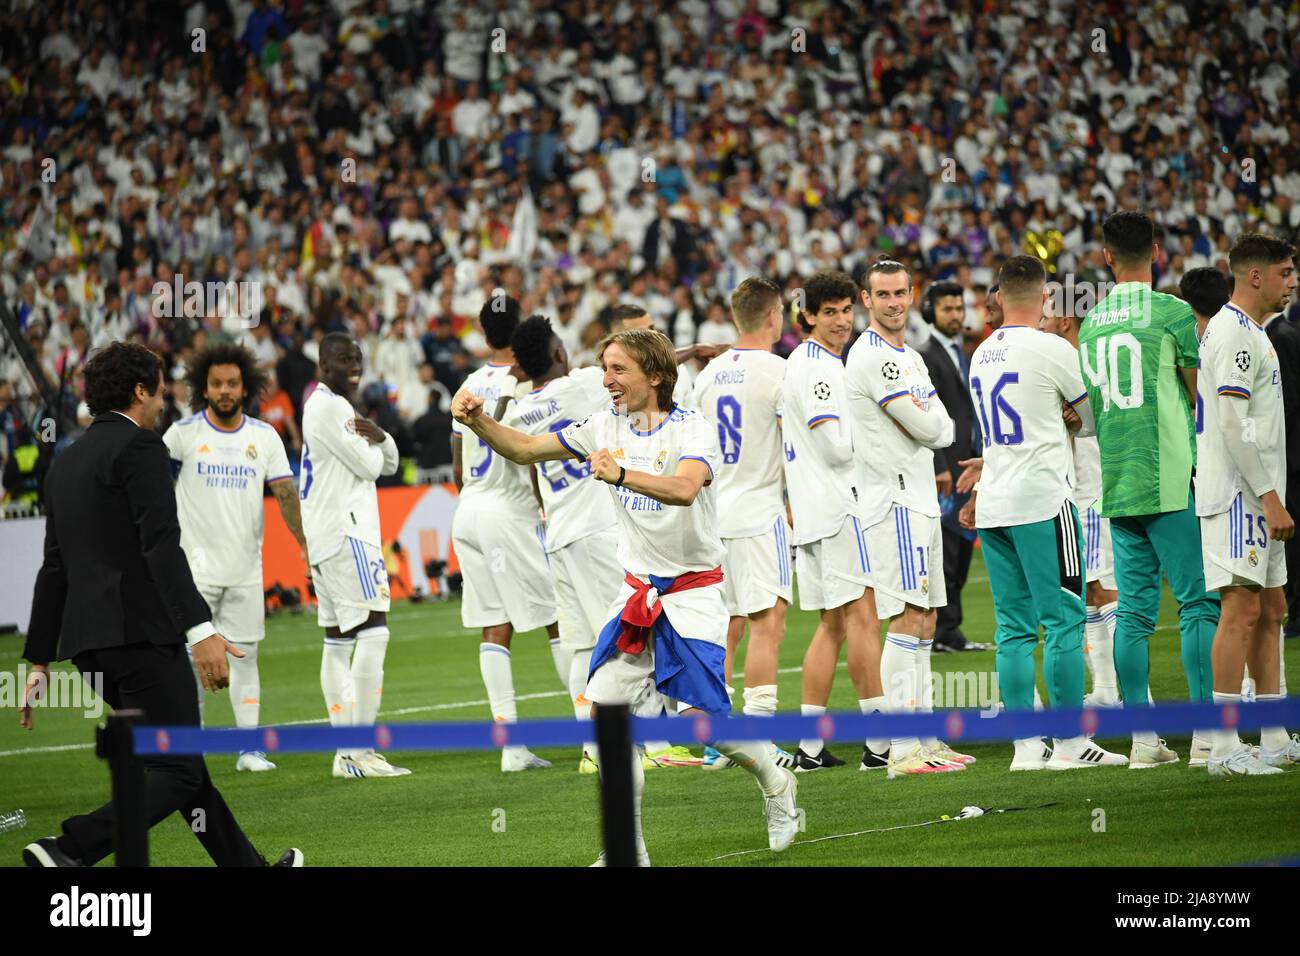 Paris, France. 28th May, 2022. Luka Modric (Real Madrid)Raul Gonzalez Blanco during the Uefa Champions League match between Liverpool 0-1 Real Madrid at Stade de France on May 28, 2022 in Paris, France. Credit: Maurizio Borsari/AFLO/Alamy Live News Credit: Aflo Co. Ltd./Alamy Live News Stock Photo